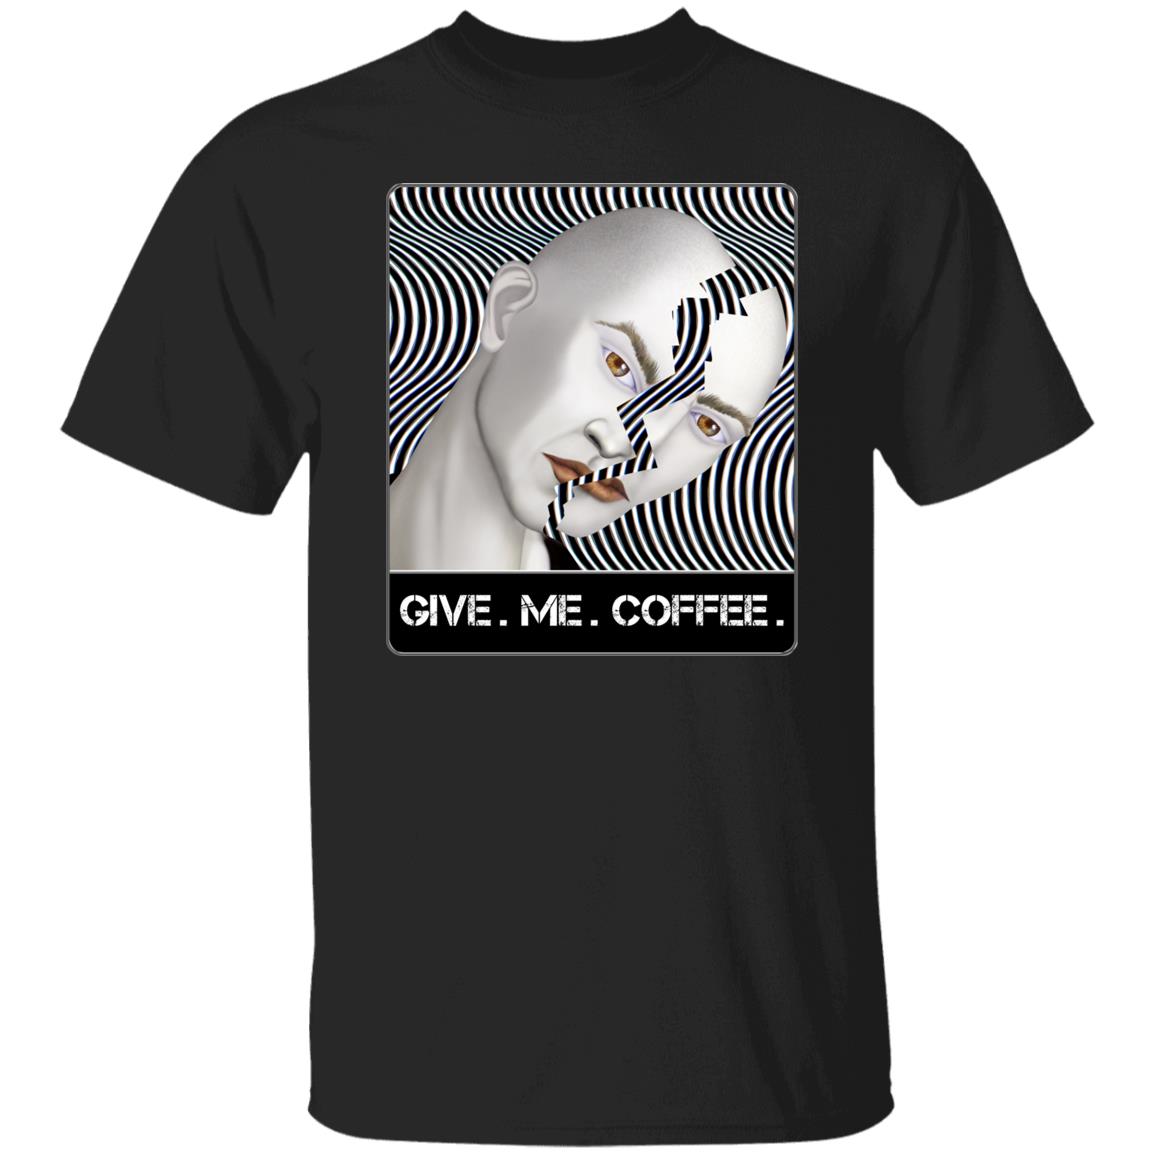 GIVE. ME. COFFEE. - Men's Classic Fit T-Shirt